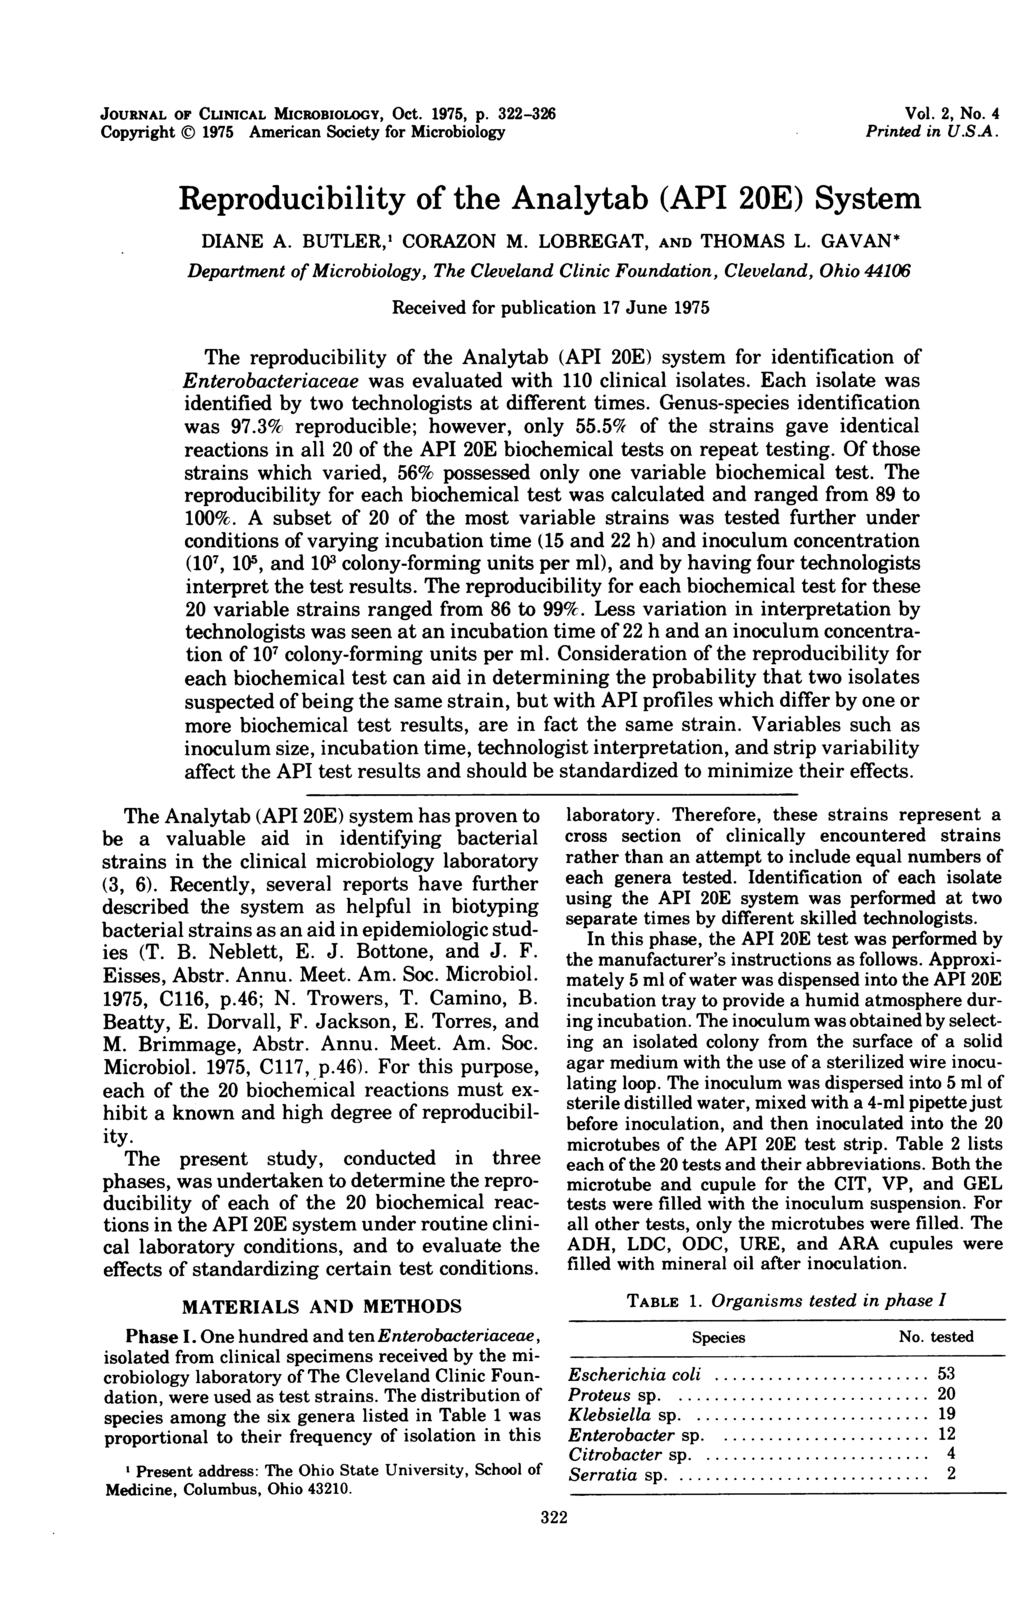 JOURNAL OF CLINCAL MICROBIOLOGY, OCt. 1975, p. 322-326 Copyright X 1975 American Society for Microbiology Vol. 2, No. 4 Printed in U.SA. of the Analytab (API 20E) System DIANE A. BUTLER,1 CORAZON M.